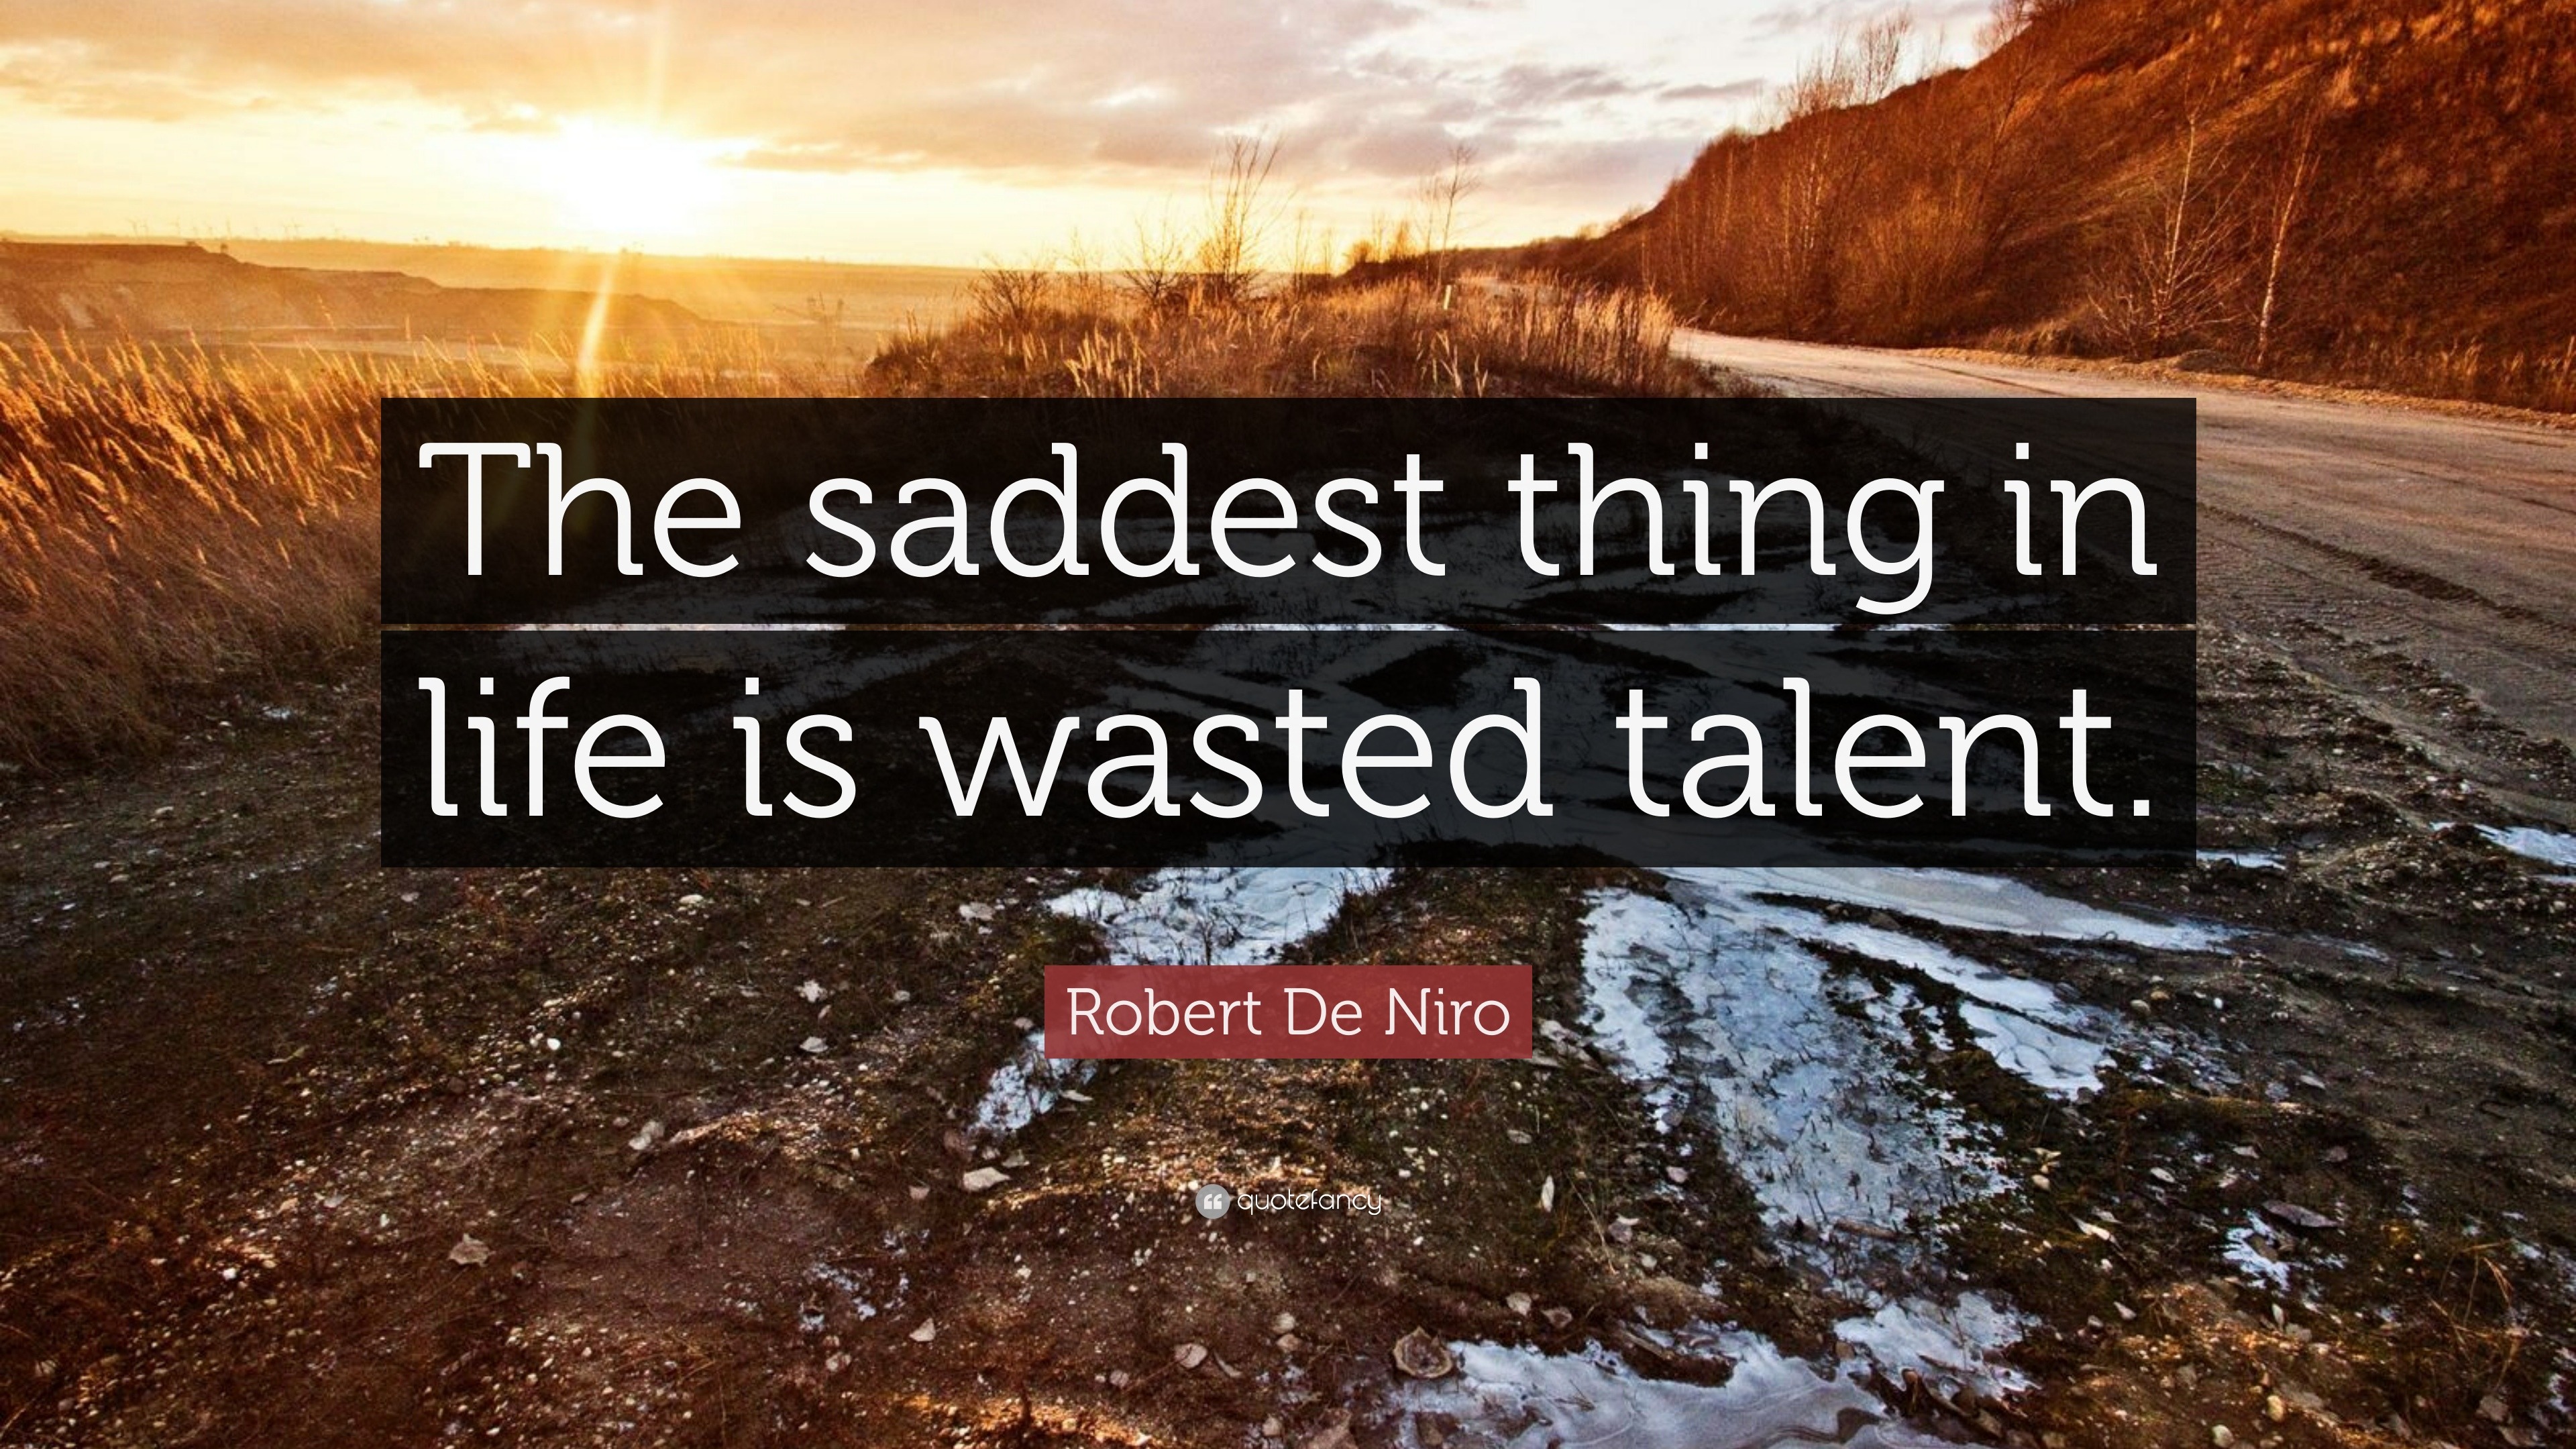 Robert De Niro Quote “The saddest thing in life is wasted talent.”